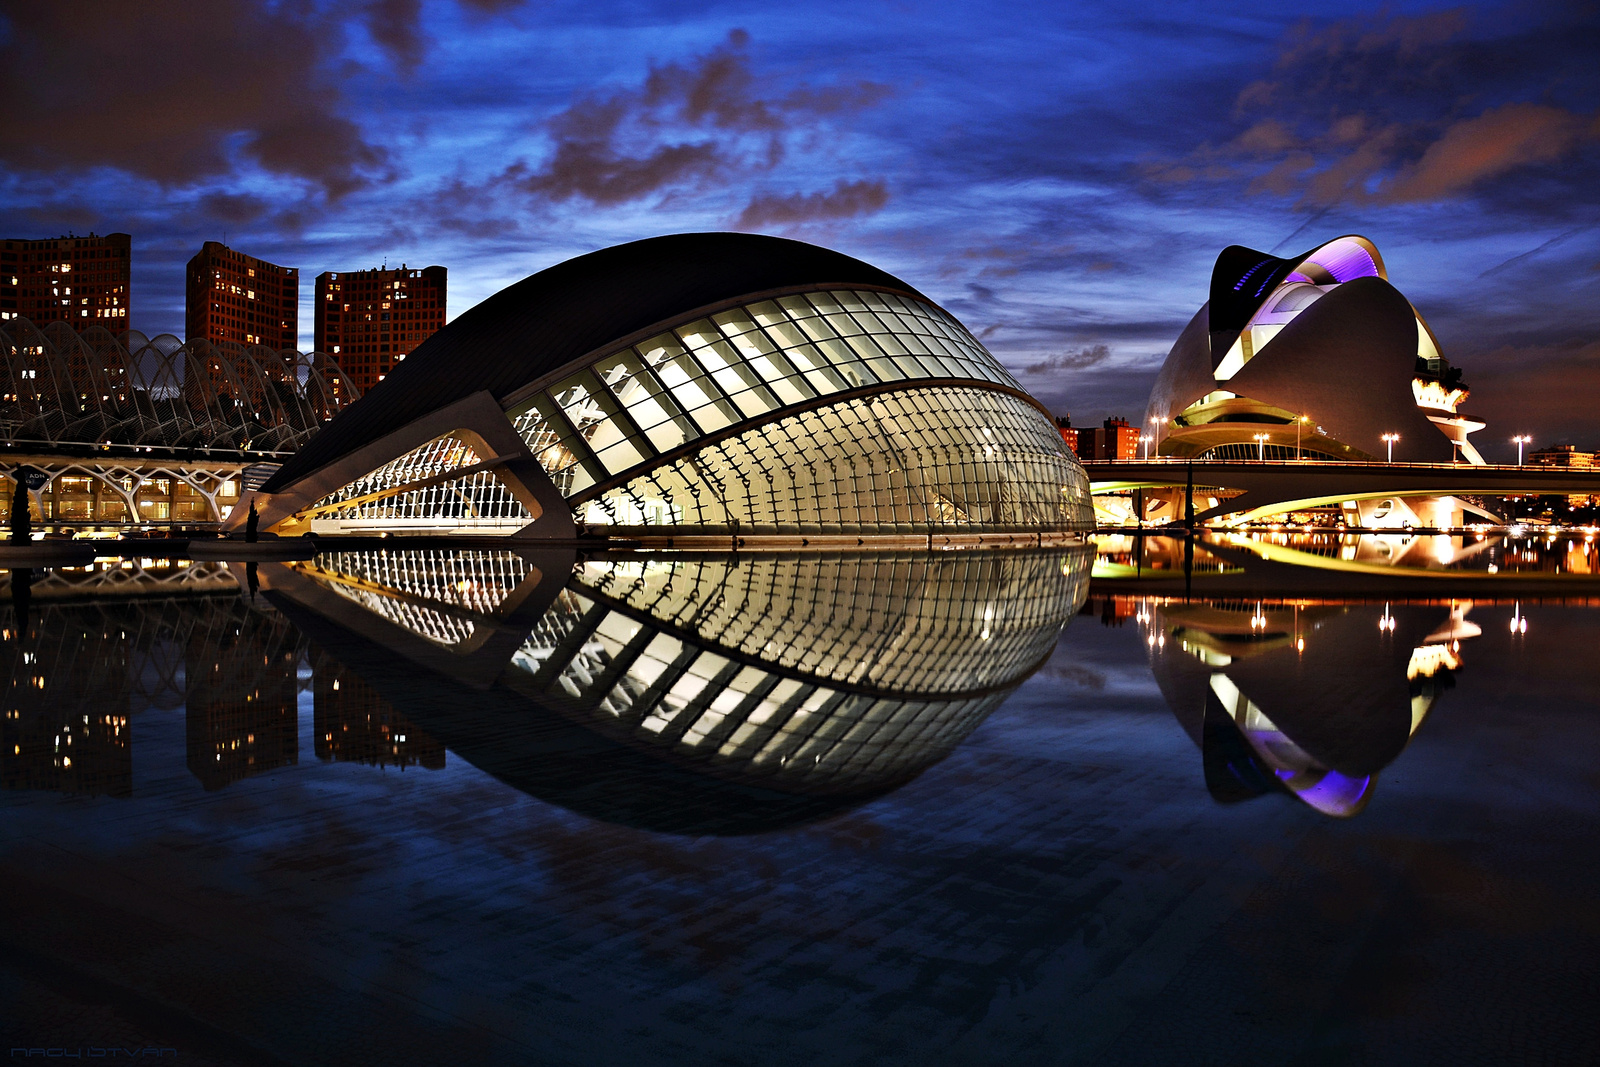 Valencia - City of Arts and Sciences During The Blue Hour